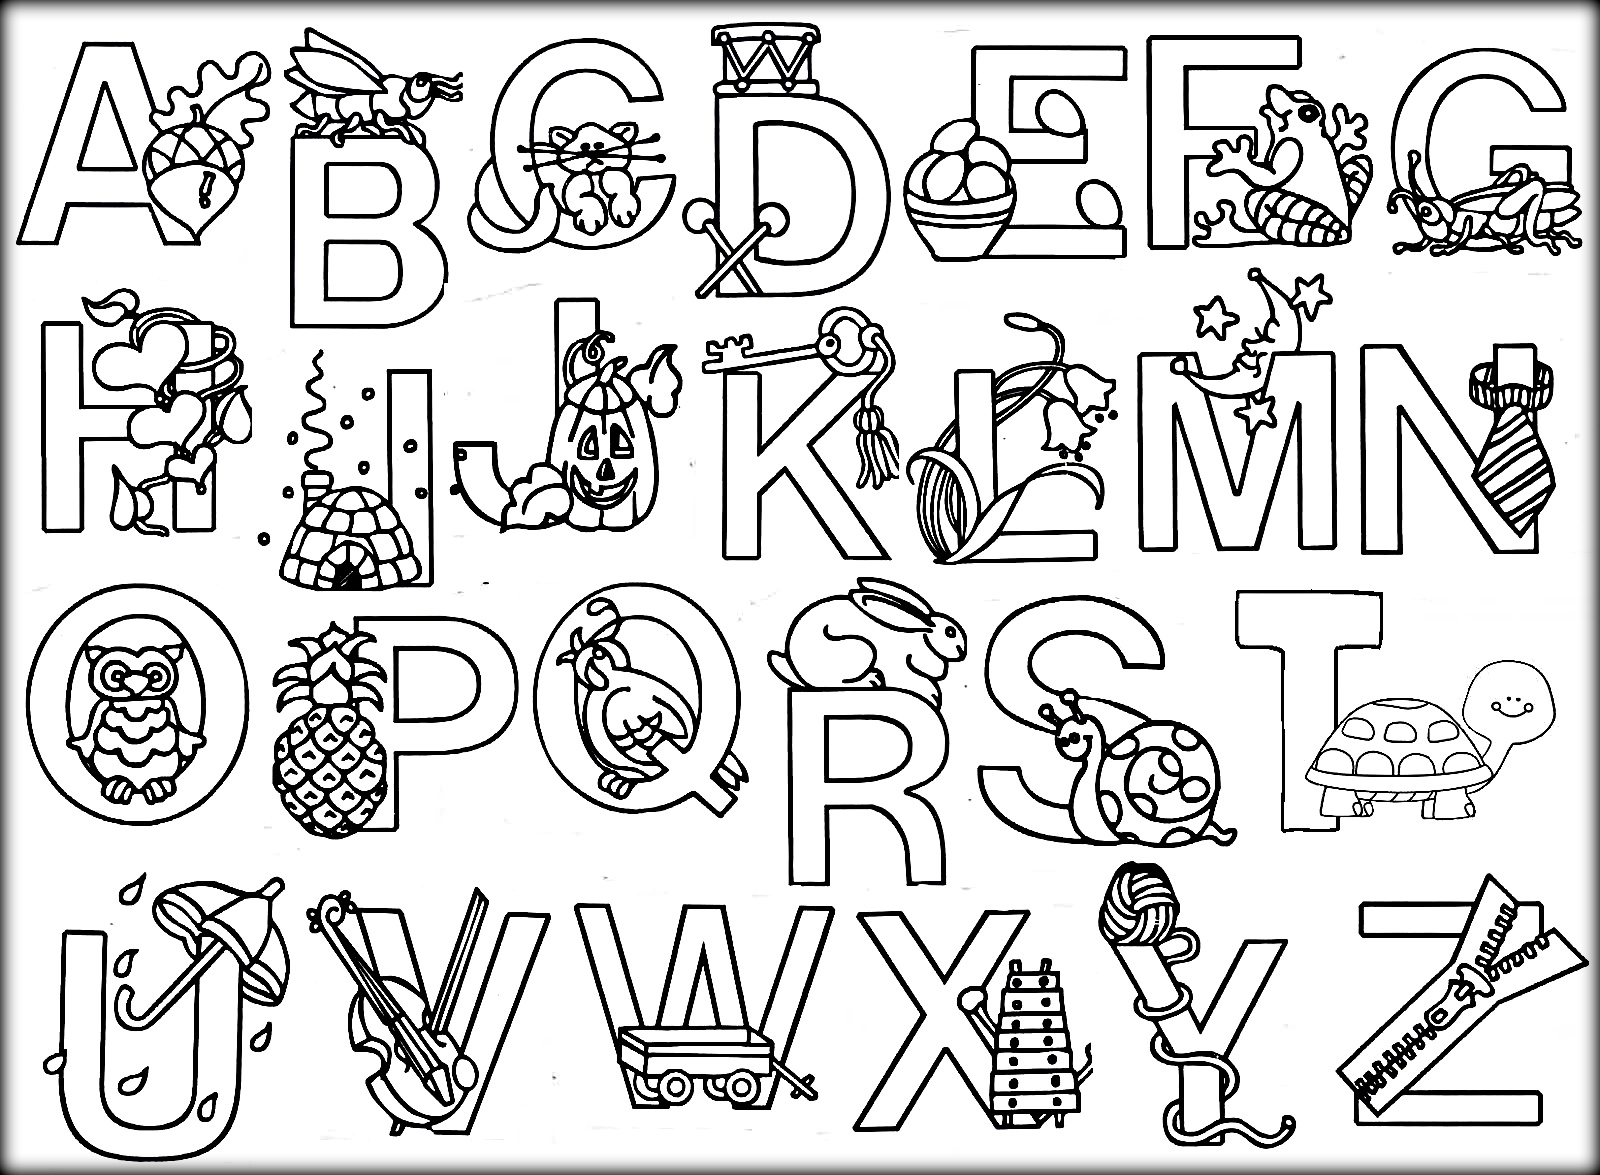 Animal Alphabet Coloring Pages Free At GetColorings Free 